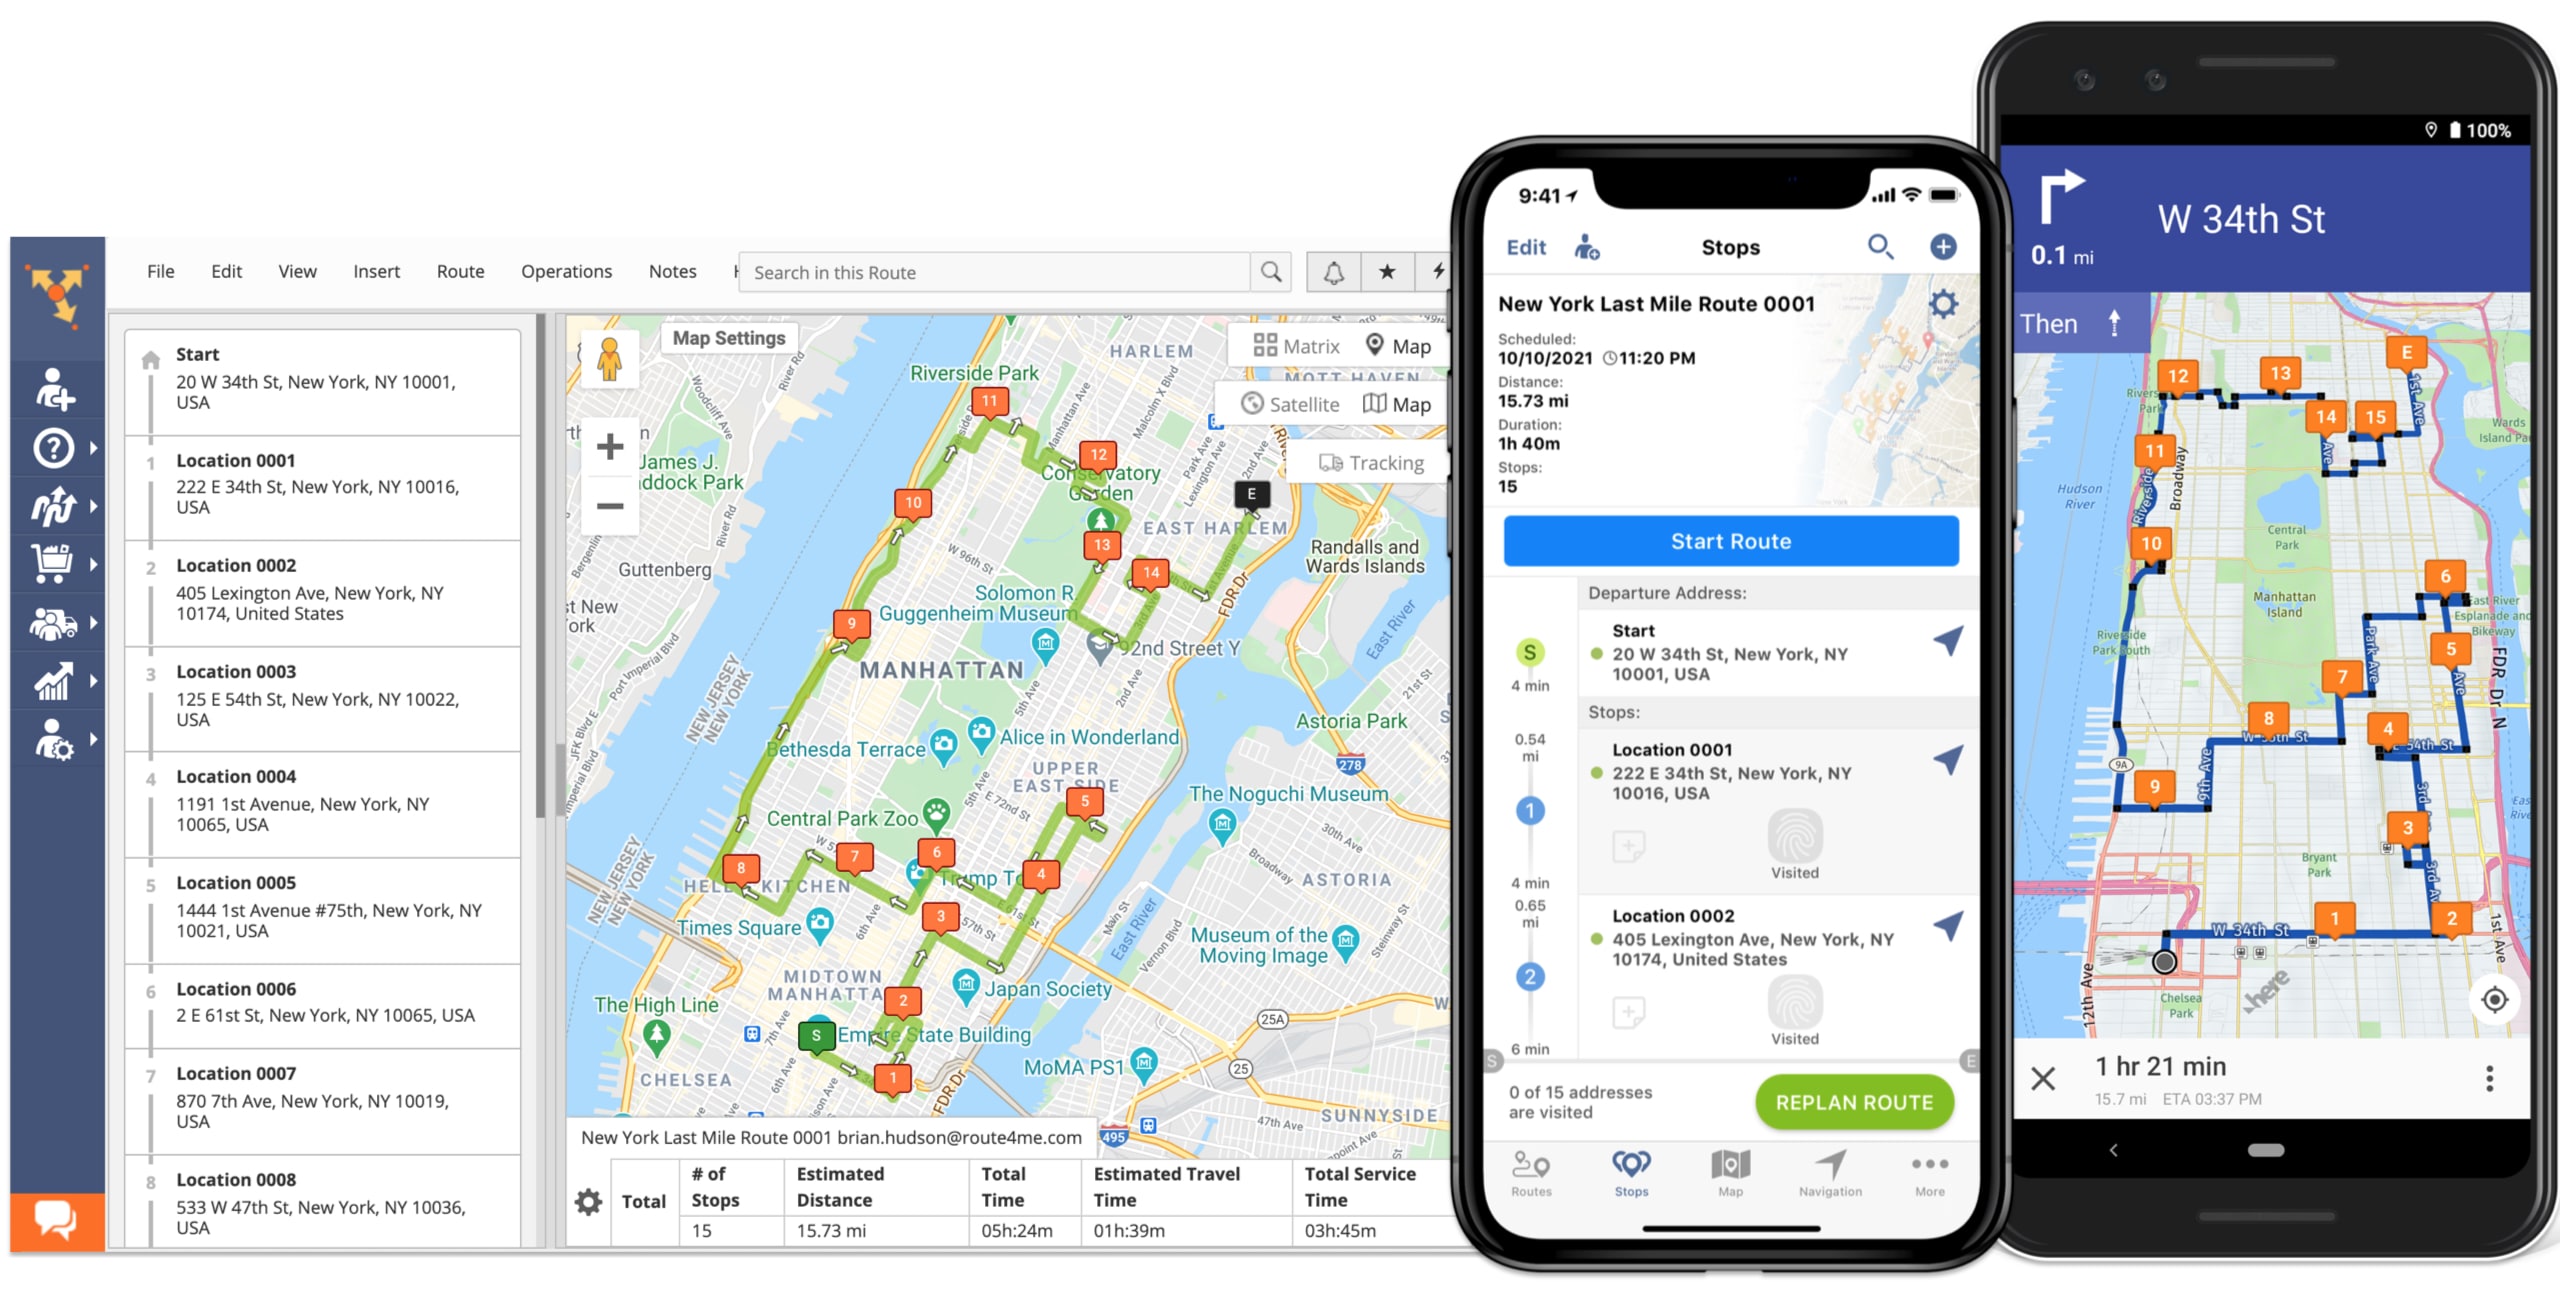 Route dispatch from route optimization software to couriers' route planner apps with voice-guided navigation.